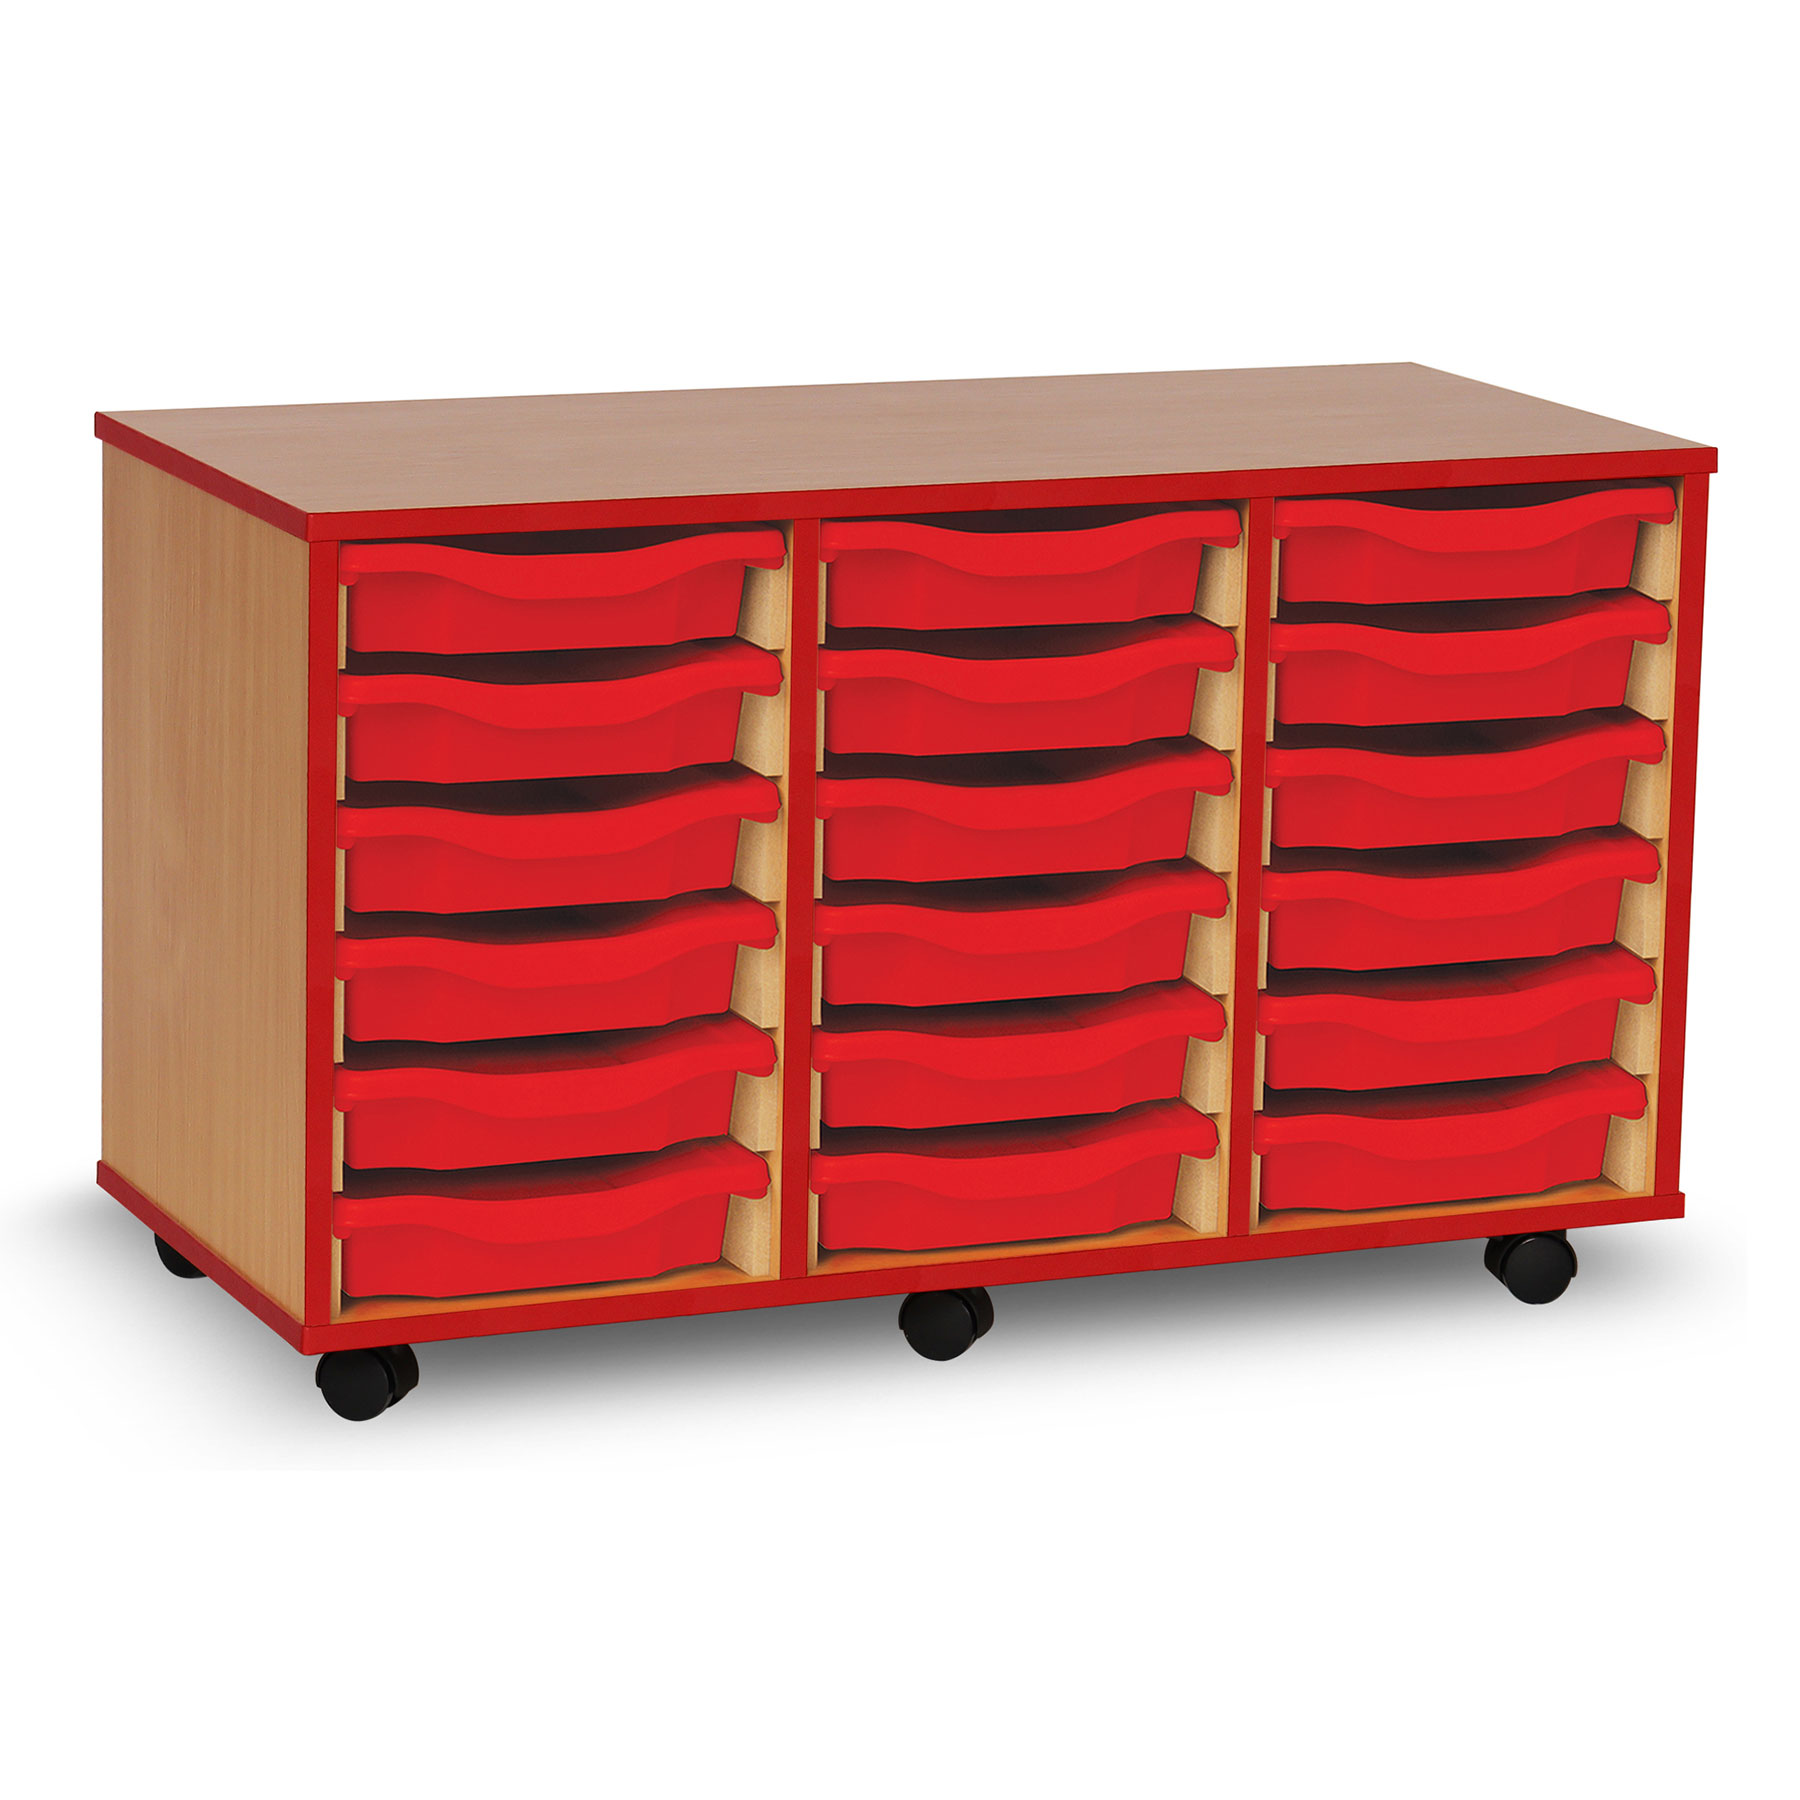 18 Single Tray Unit with Red Edging, Castors & Red Trays